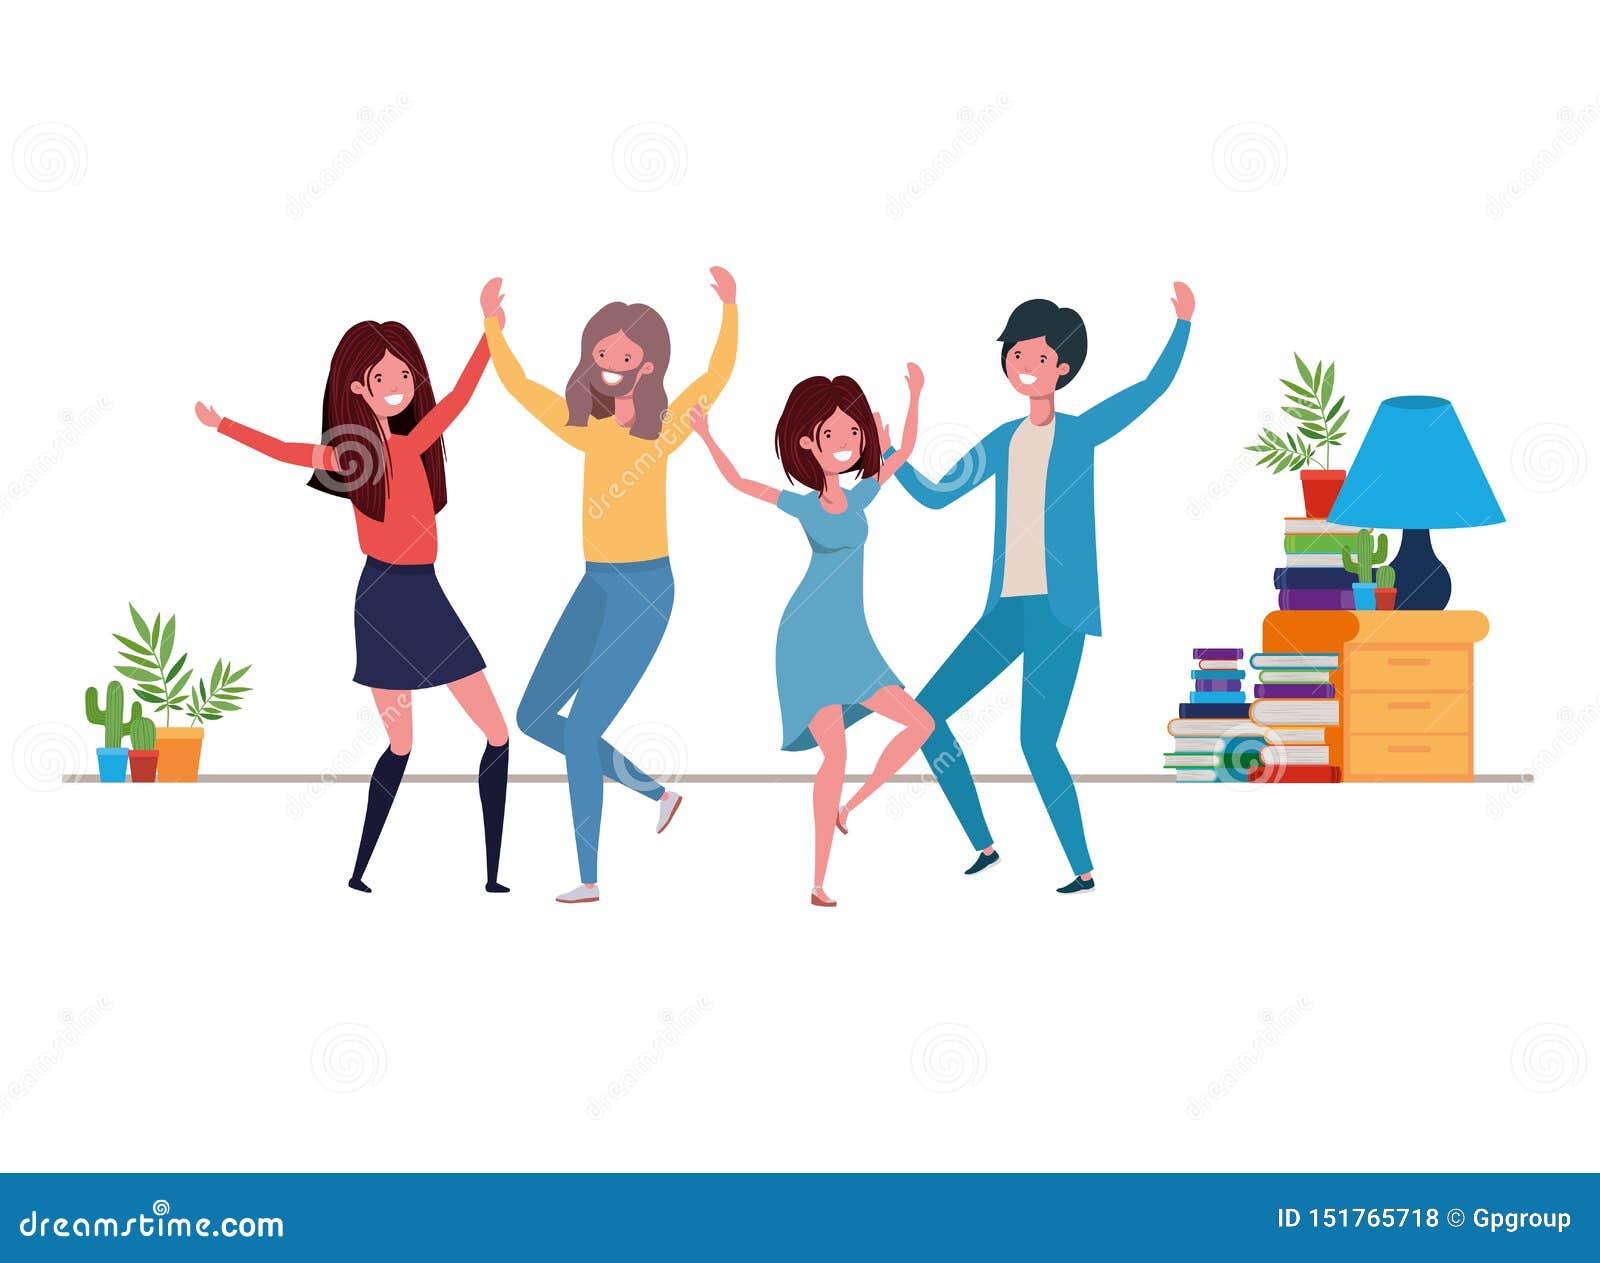 Group of People Dancing in Living Room Stock Vector - Illustration of ...